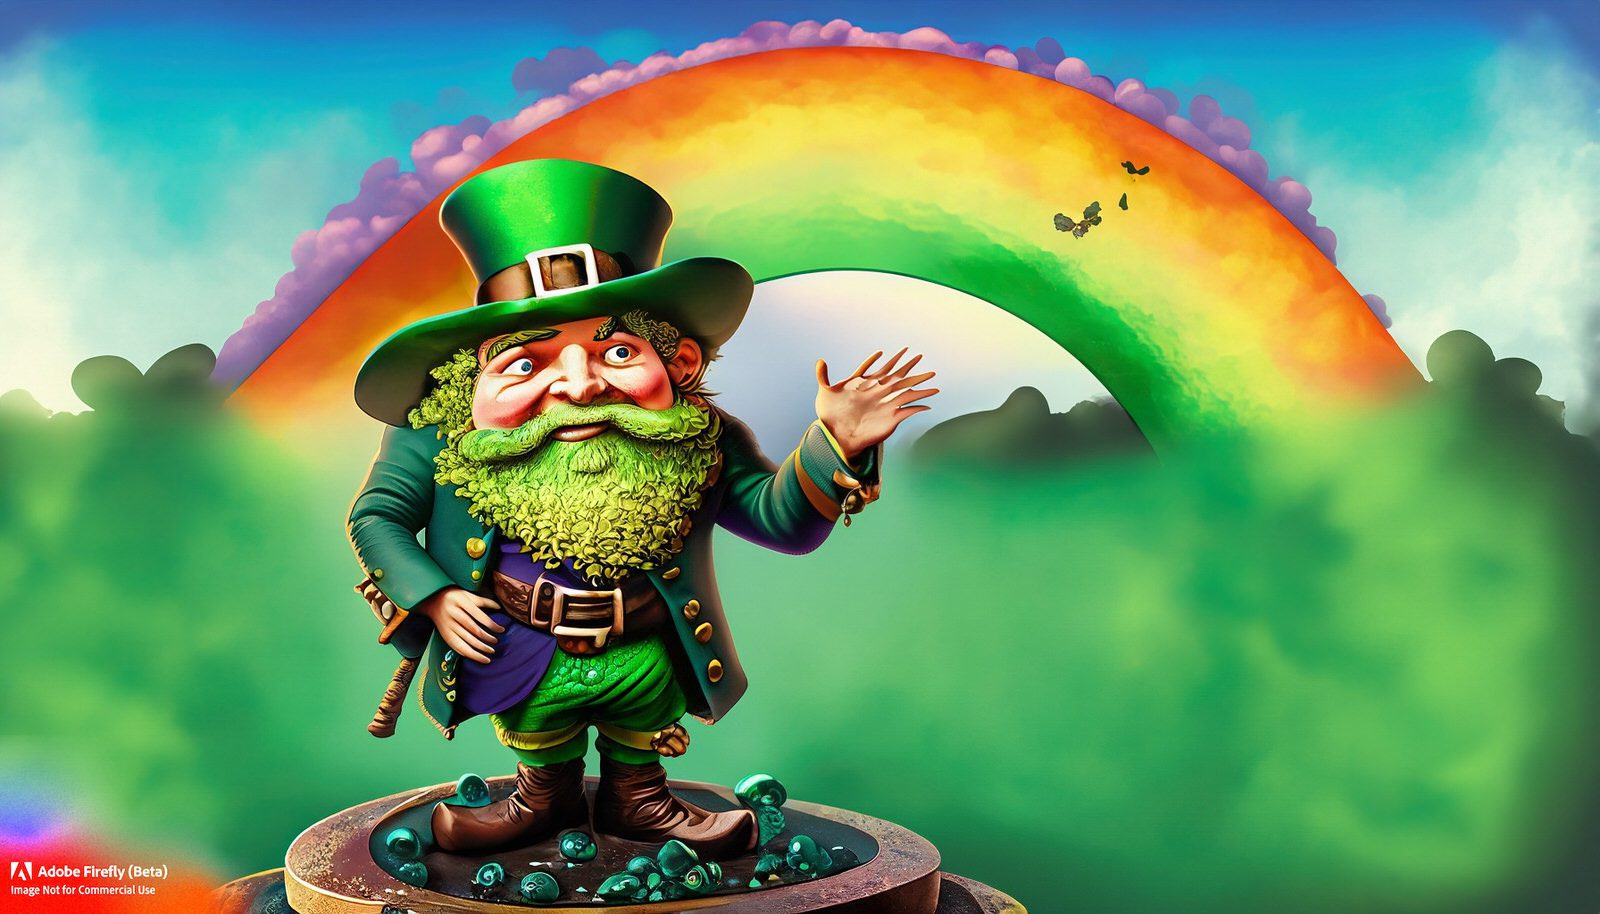 IF YOU ASK ADOBE FIREFLY TO GENERATE AN IMAGE OF A LEPRECHAUN THIS IS WHAT YOU GET 003